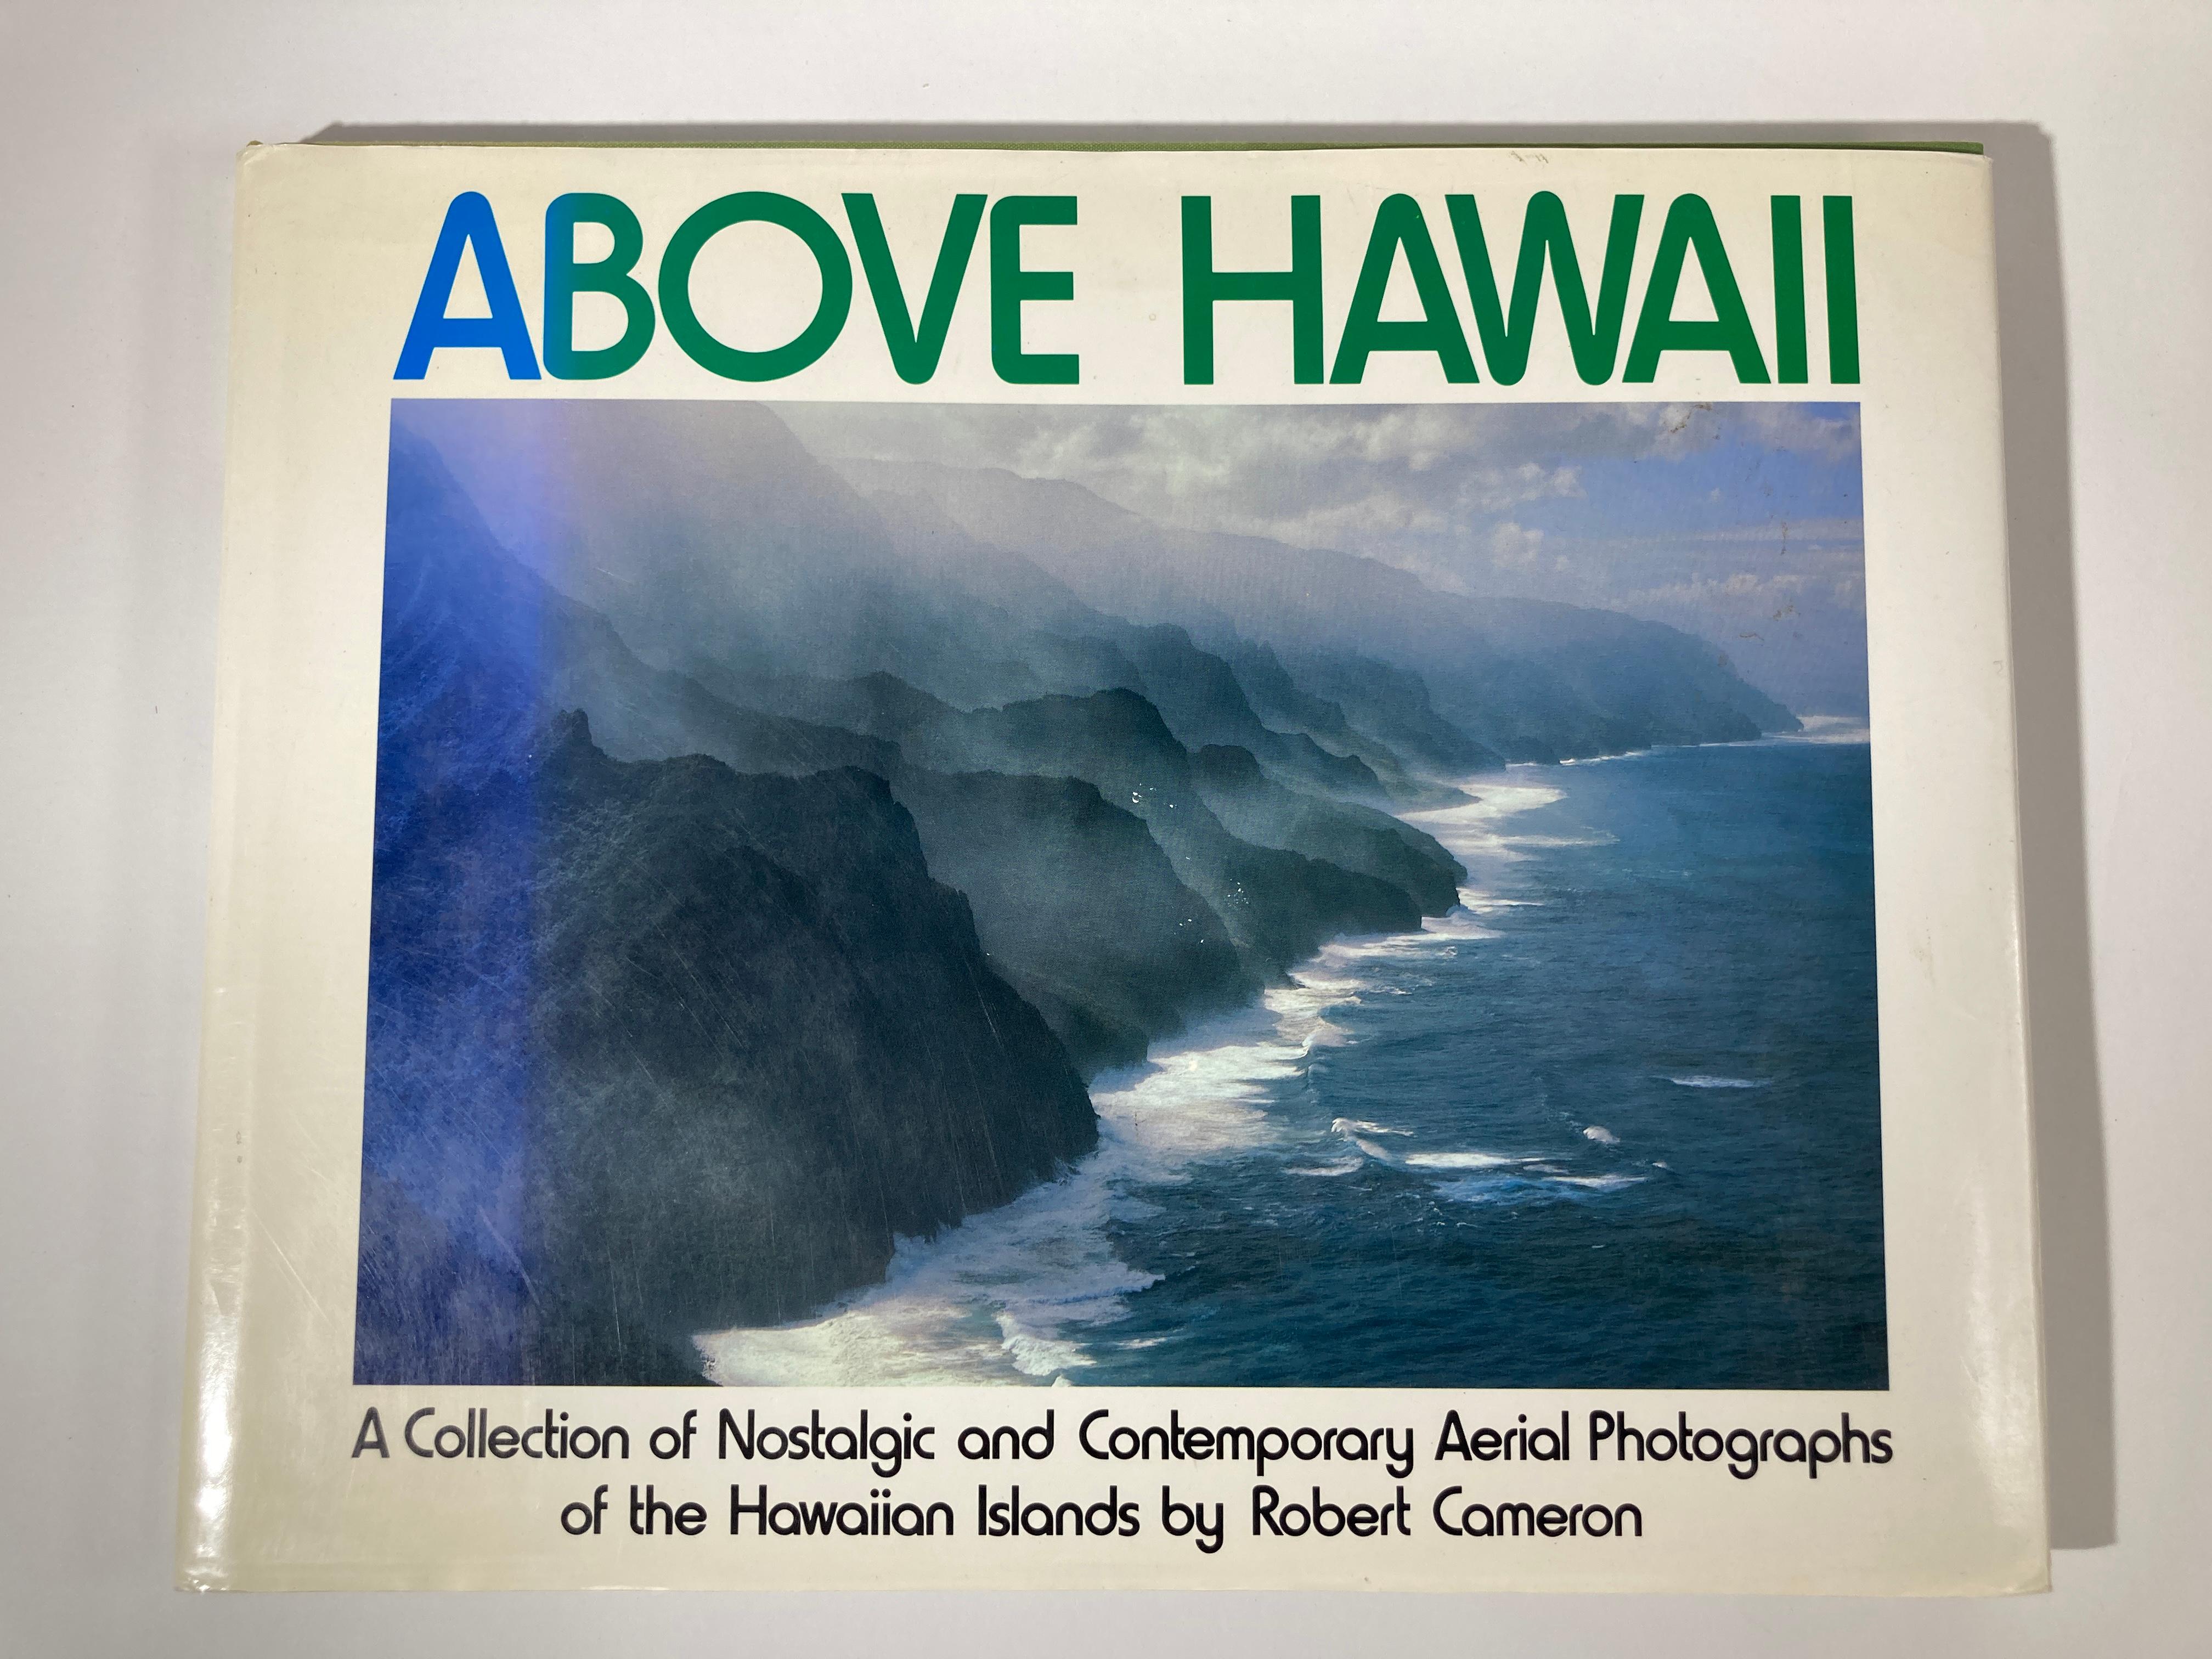 Above Hawaii: A Collection of Nostalgic and Contemporary Aerial Photographs of the Hawaiian Islands: by Robert Cameron.
Historic photographs and several high altitude NASA photographs are combined with recent pictures taken primarily from